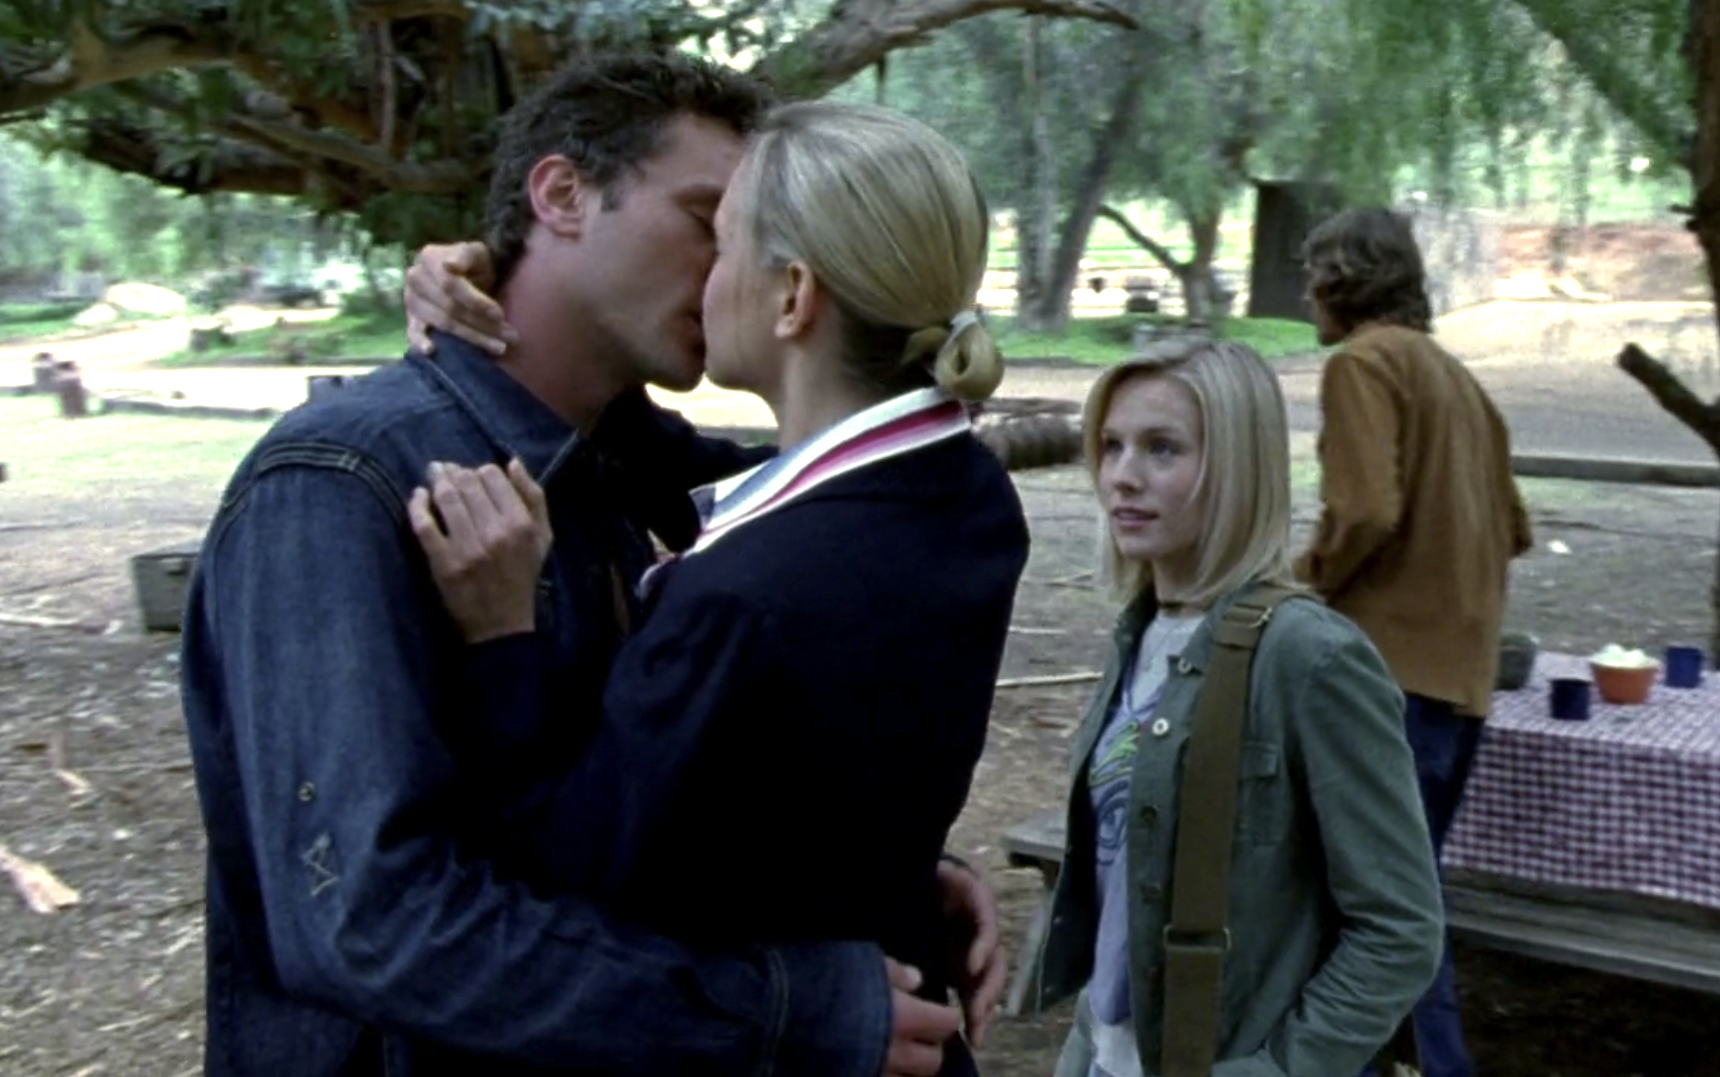 Screenshot from S1E9 of Veronica Mars. Josh and Holly make out at the farm while Veronica looks on in surprise.